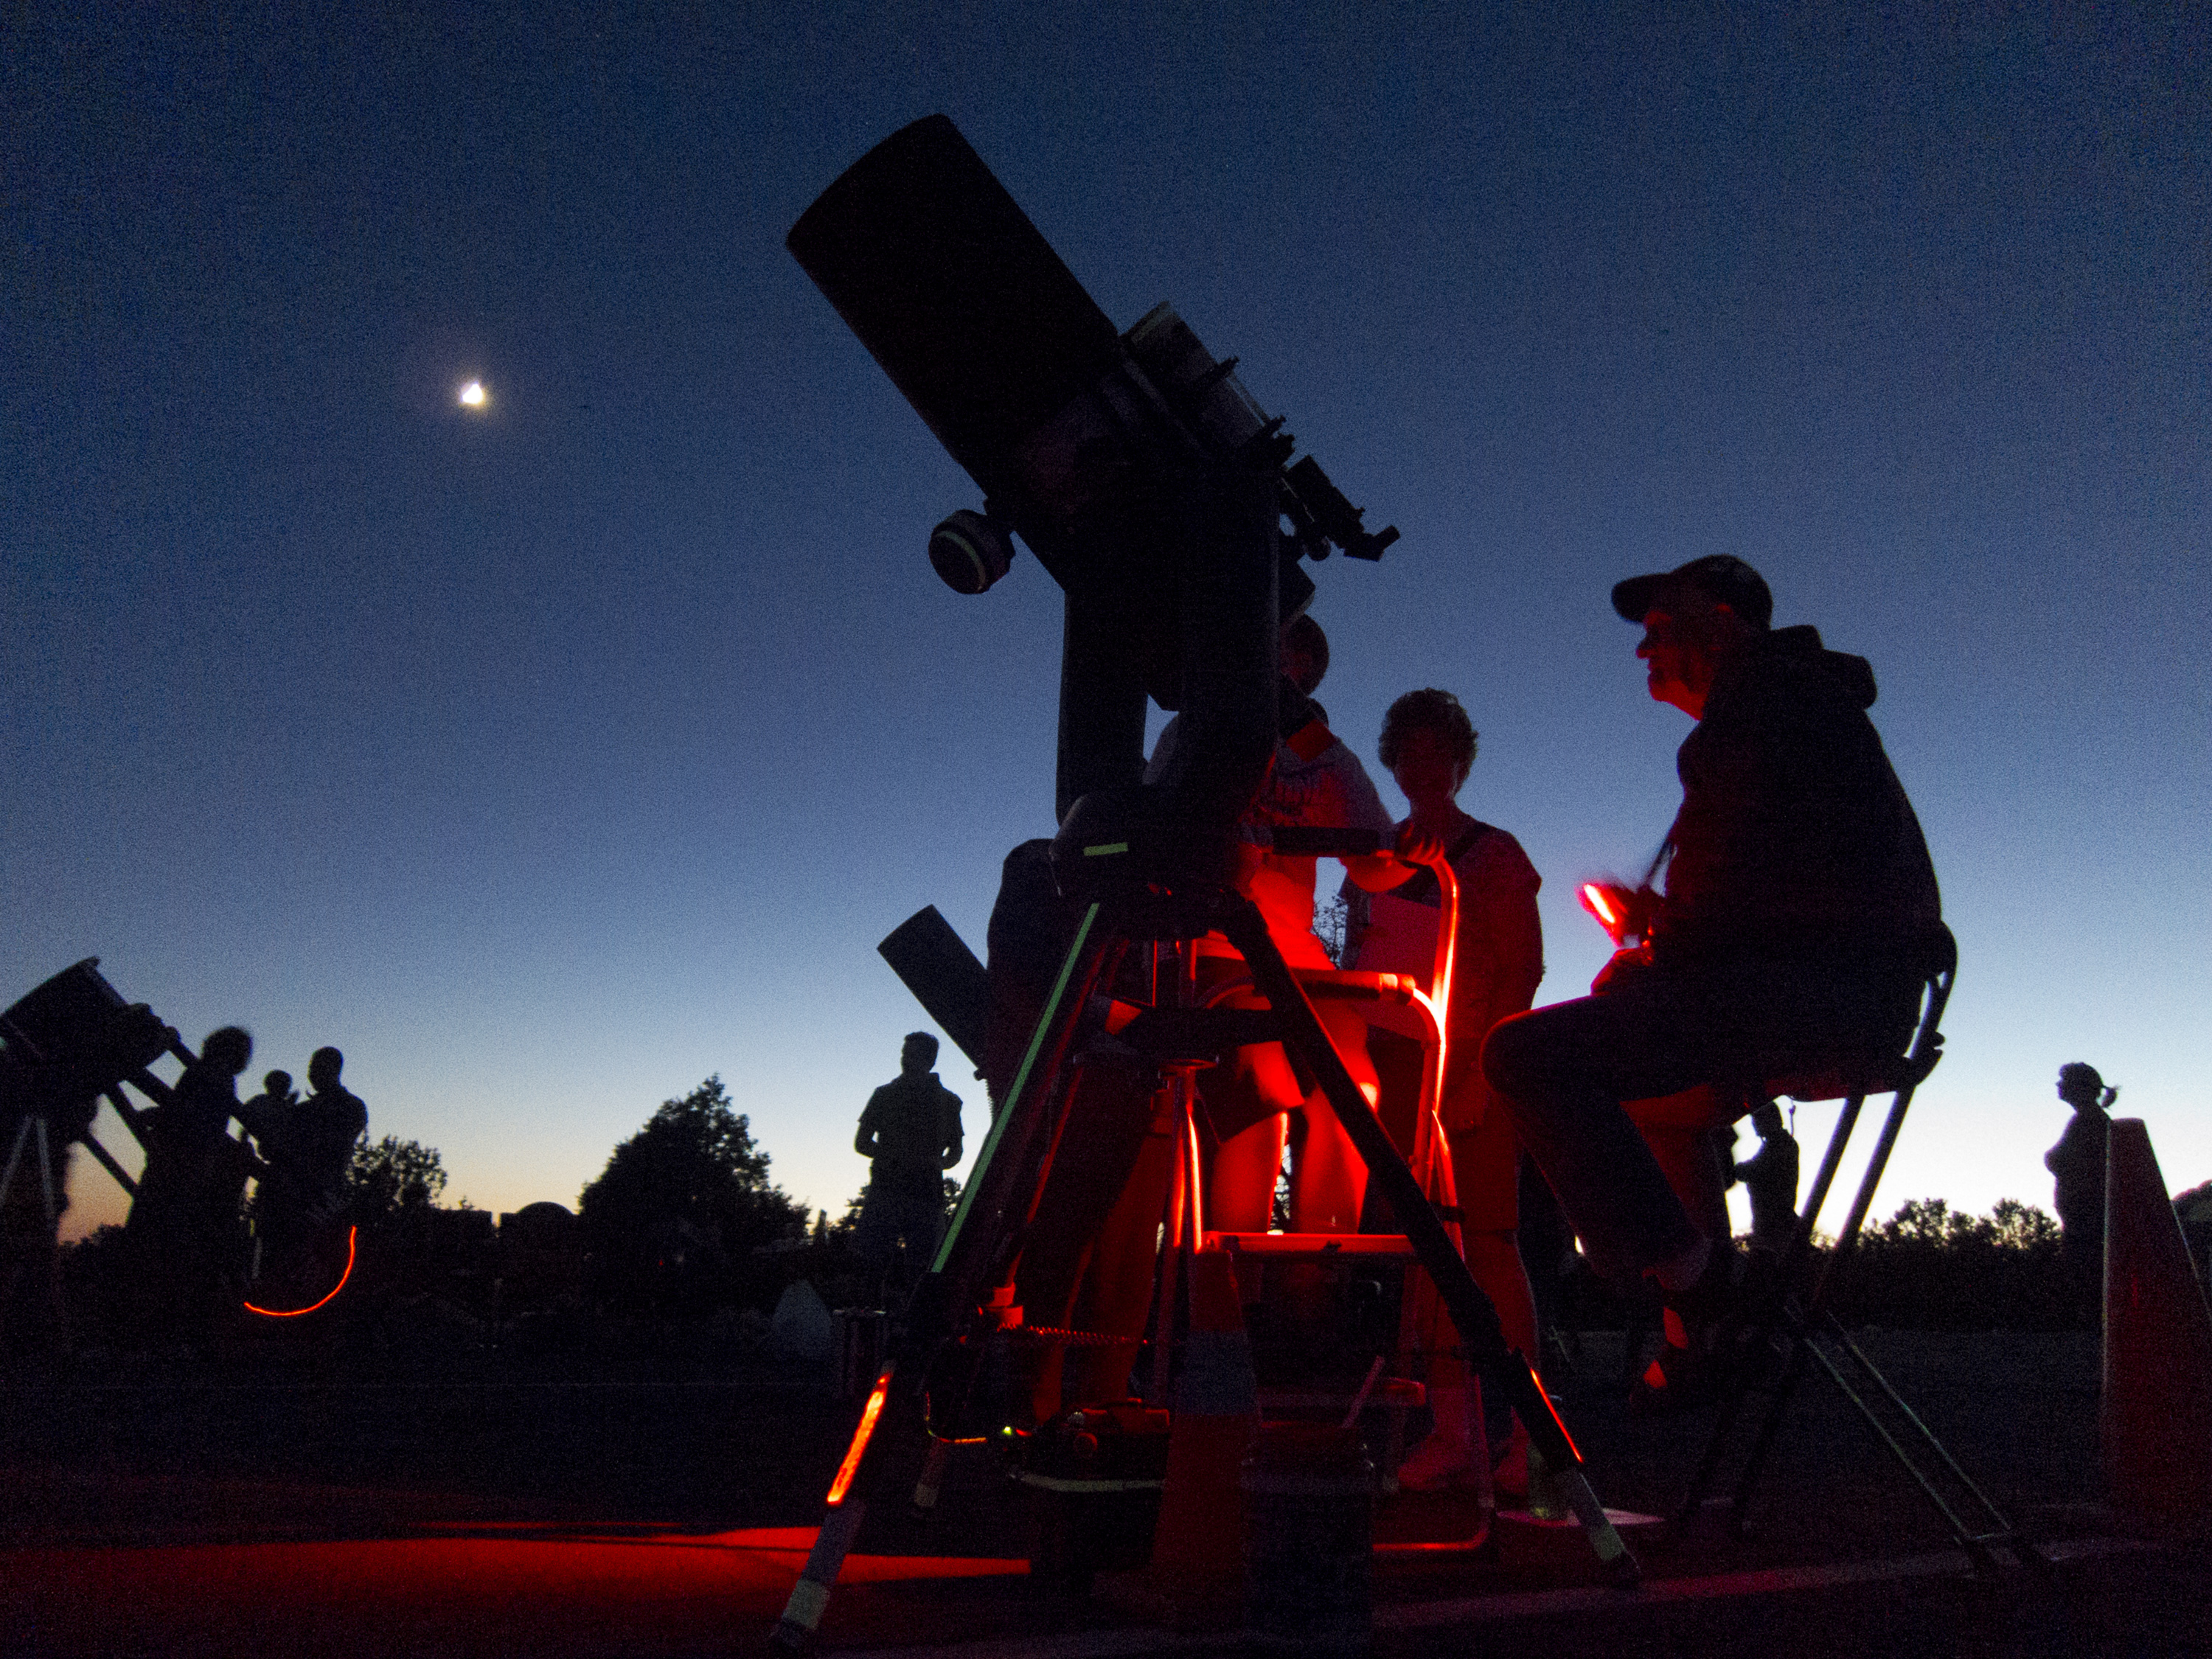 pictures of amateur astronomers